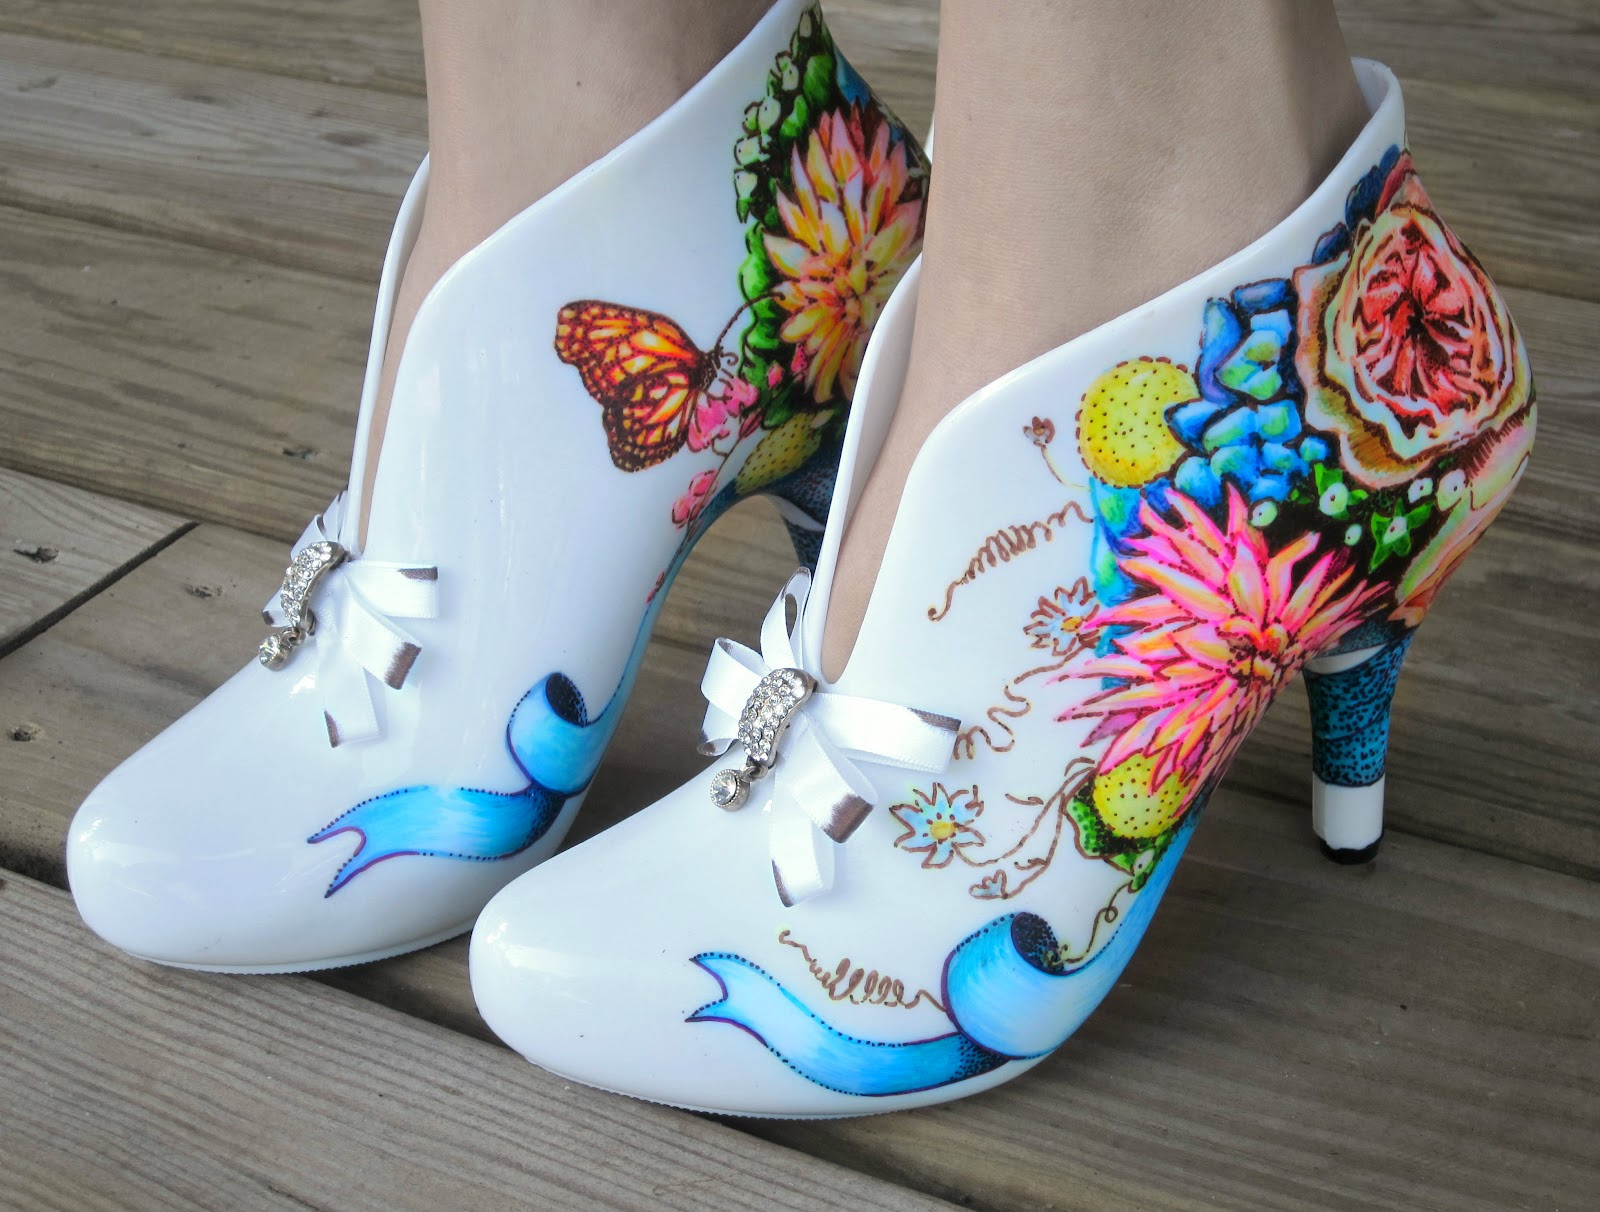 Painted Wedding Shoes
 Behind The Painted Shoes by Love Miranda Marie Love